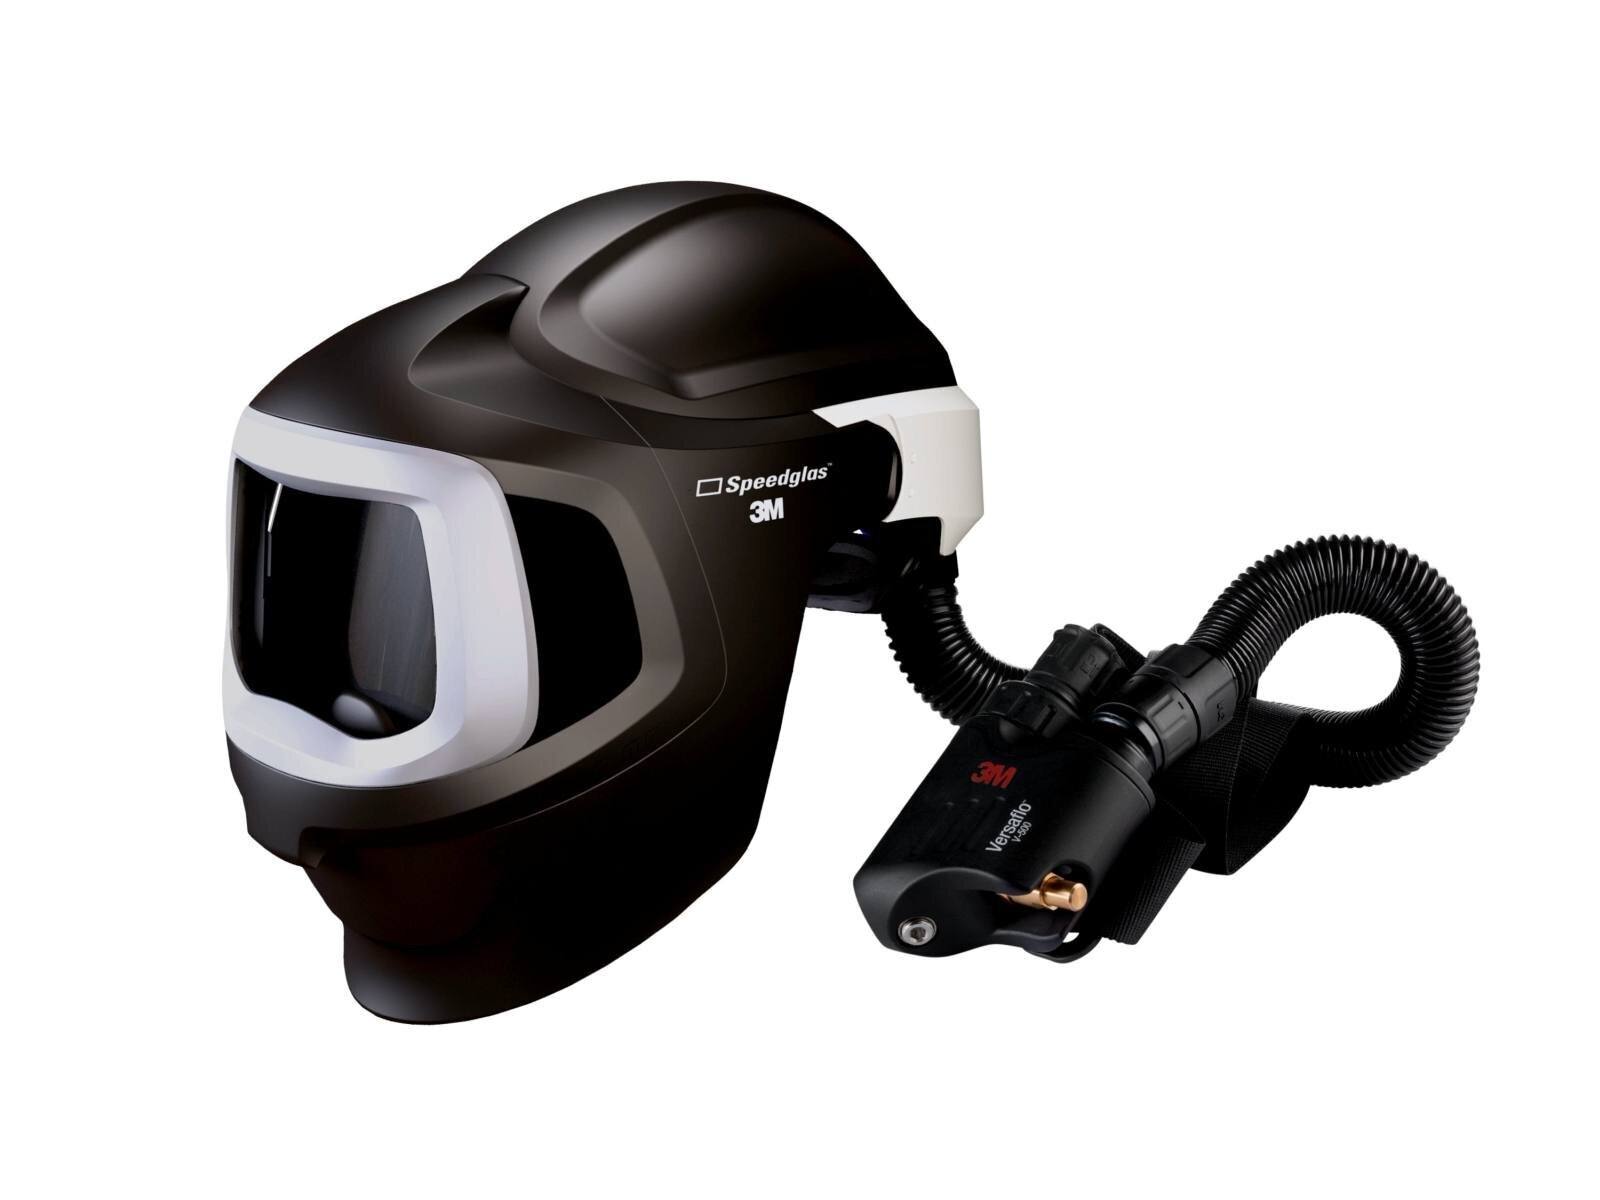  3M Speedglas 9100 MP welding mask, without ADF, with Versaflo V-500E compressed air breathing protection, QRS air hose, 5333506 adapter, air flow meter, pre-filter, spark arrester, particle filter, lithium-ion battery and charger incl. storage bag #57880